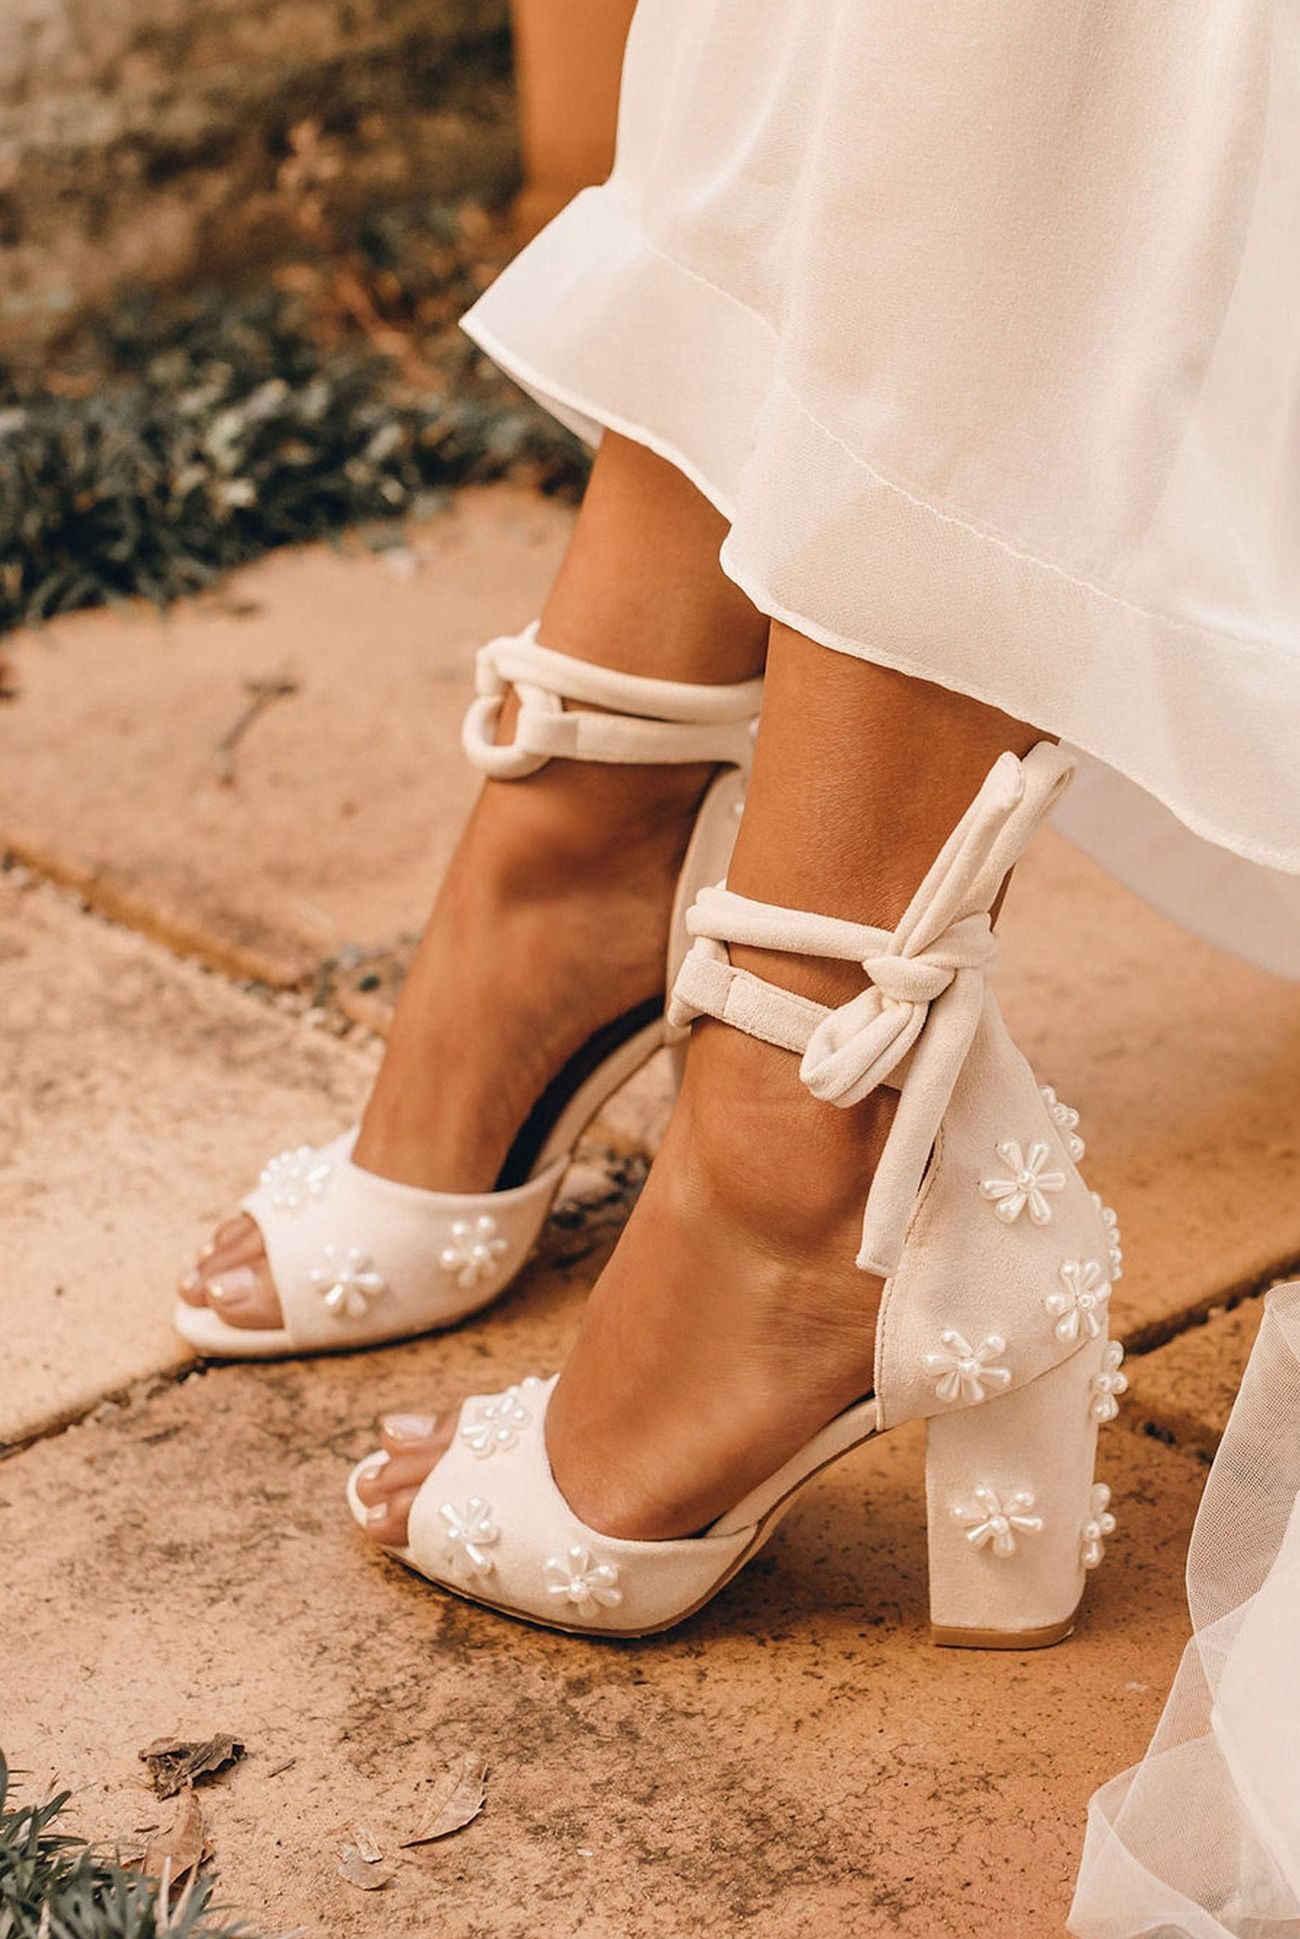 Bridal Beauty: Step into Elegance with Bridal Shoes